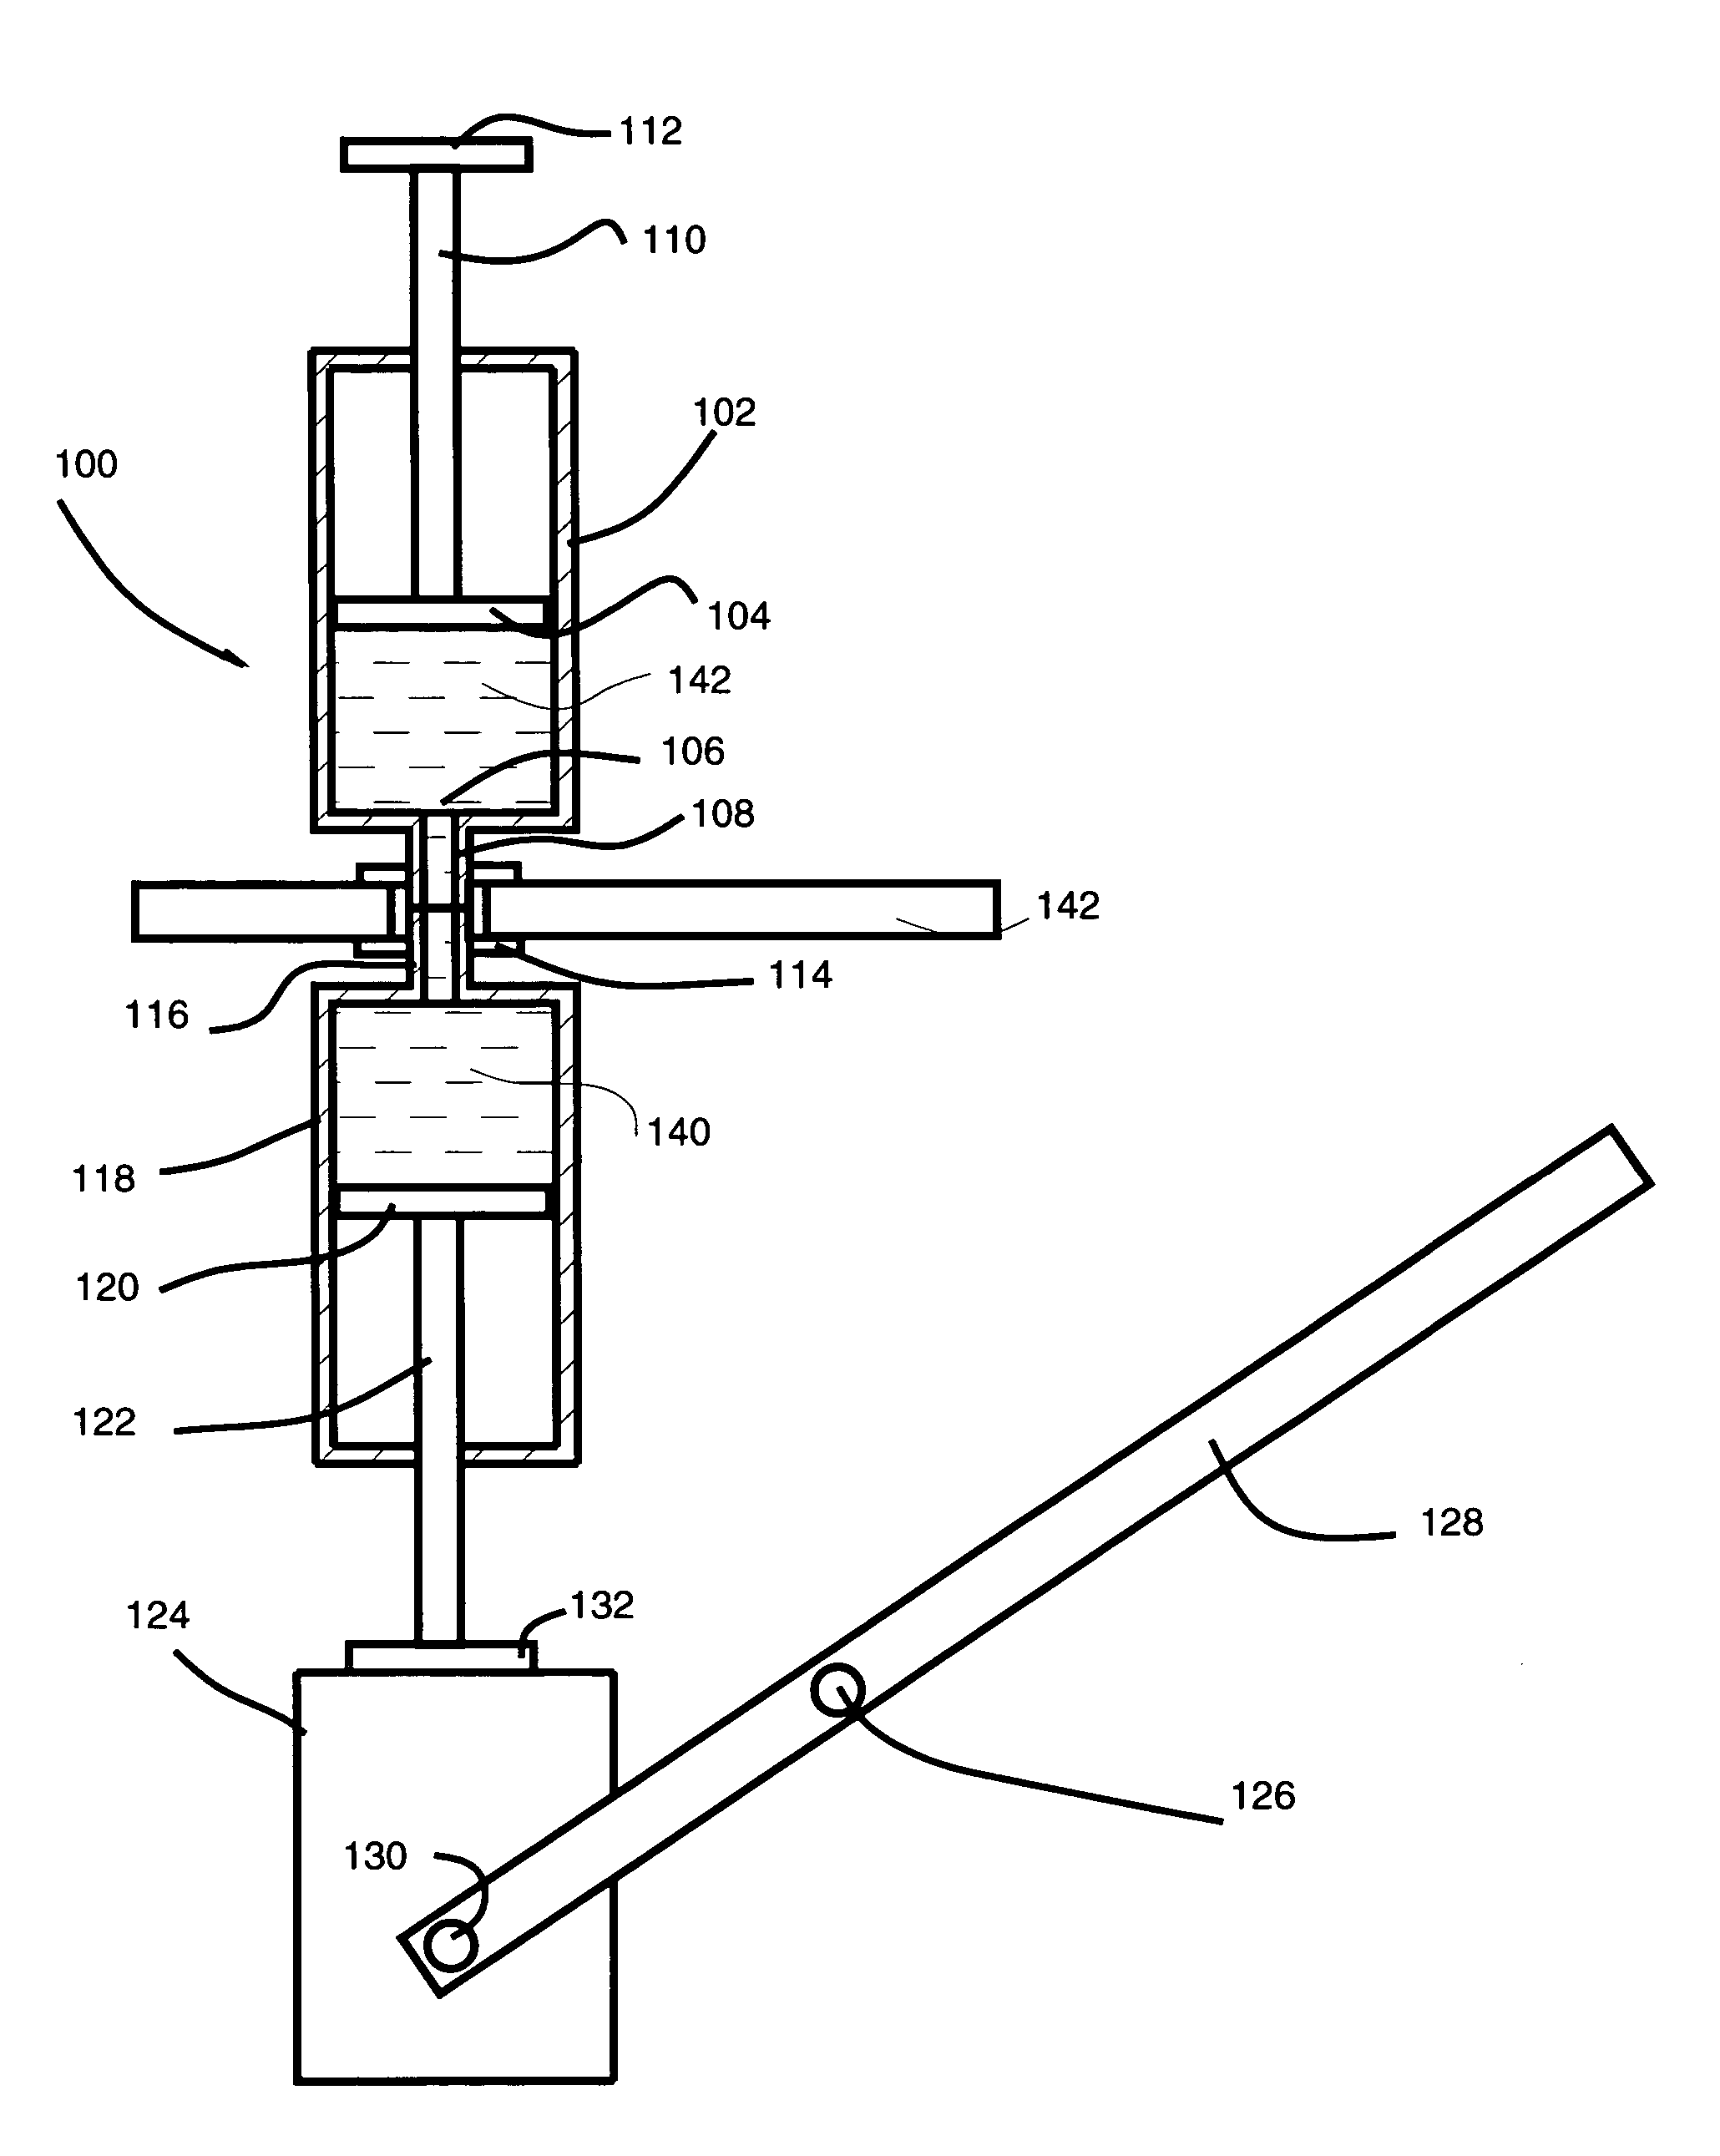 Method and apparatus for compounding medications